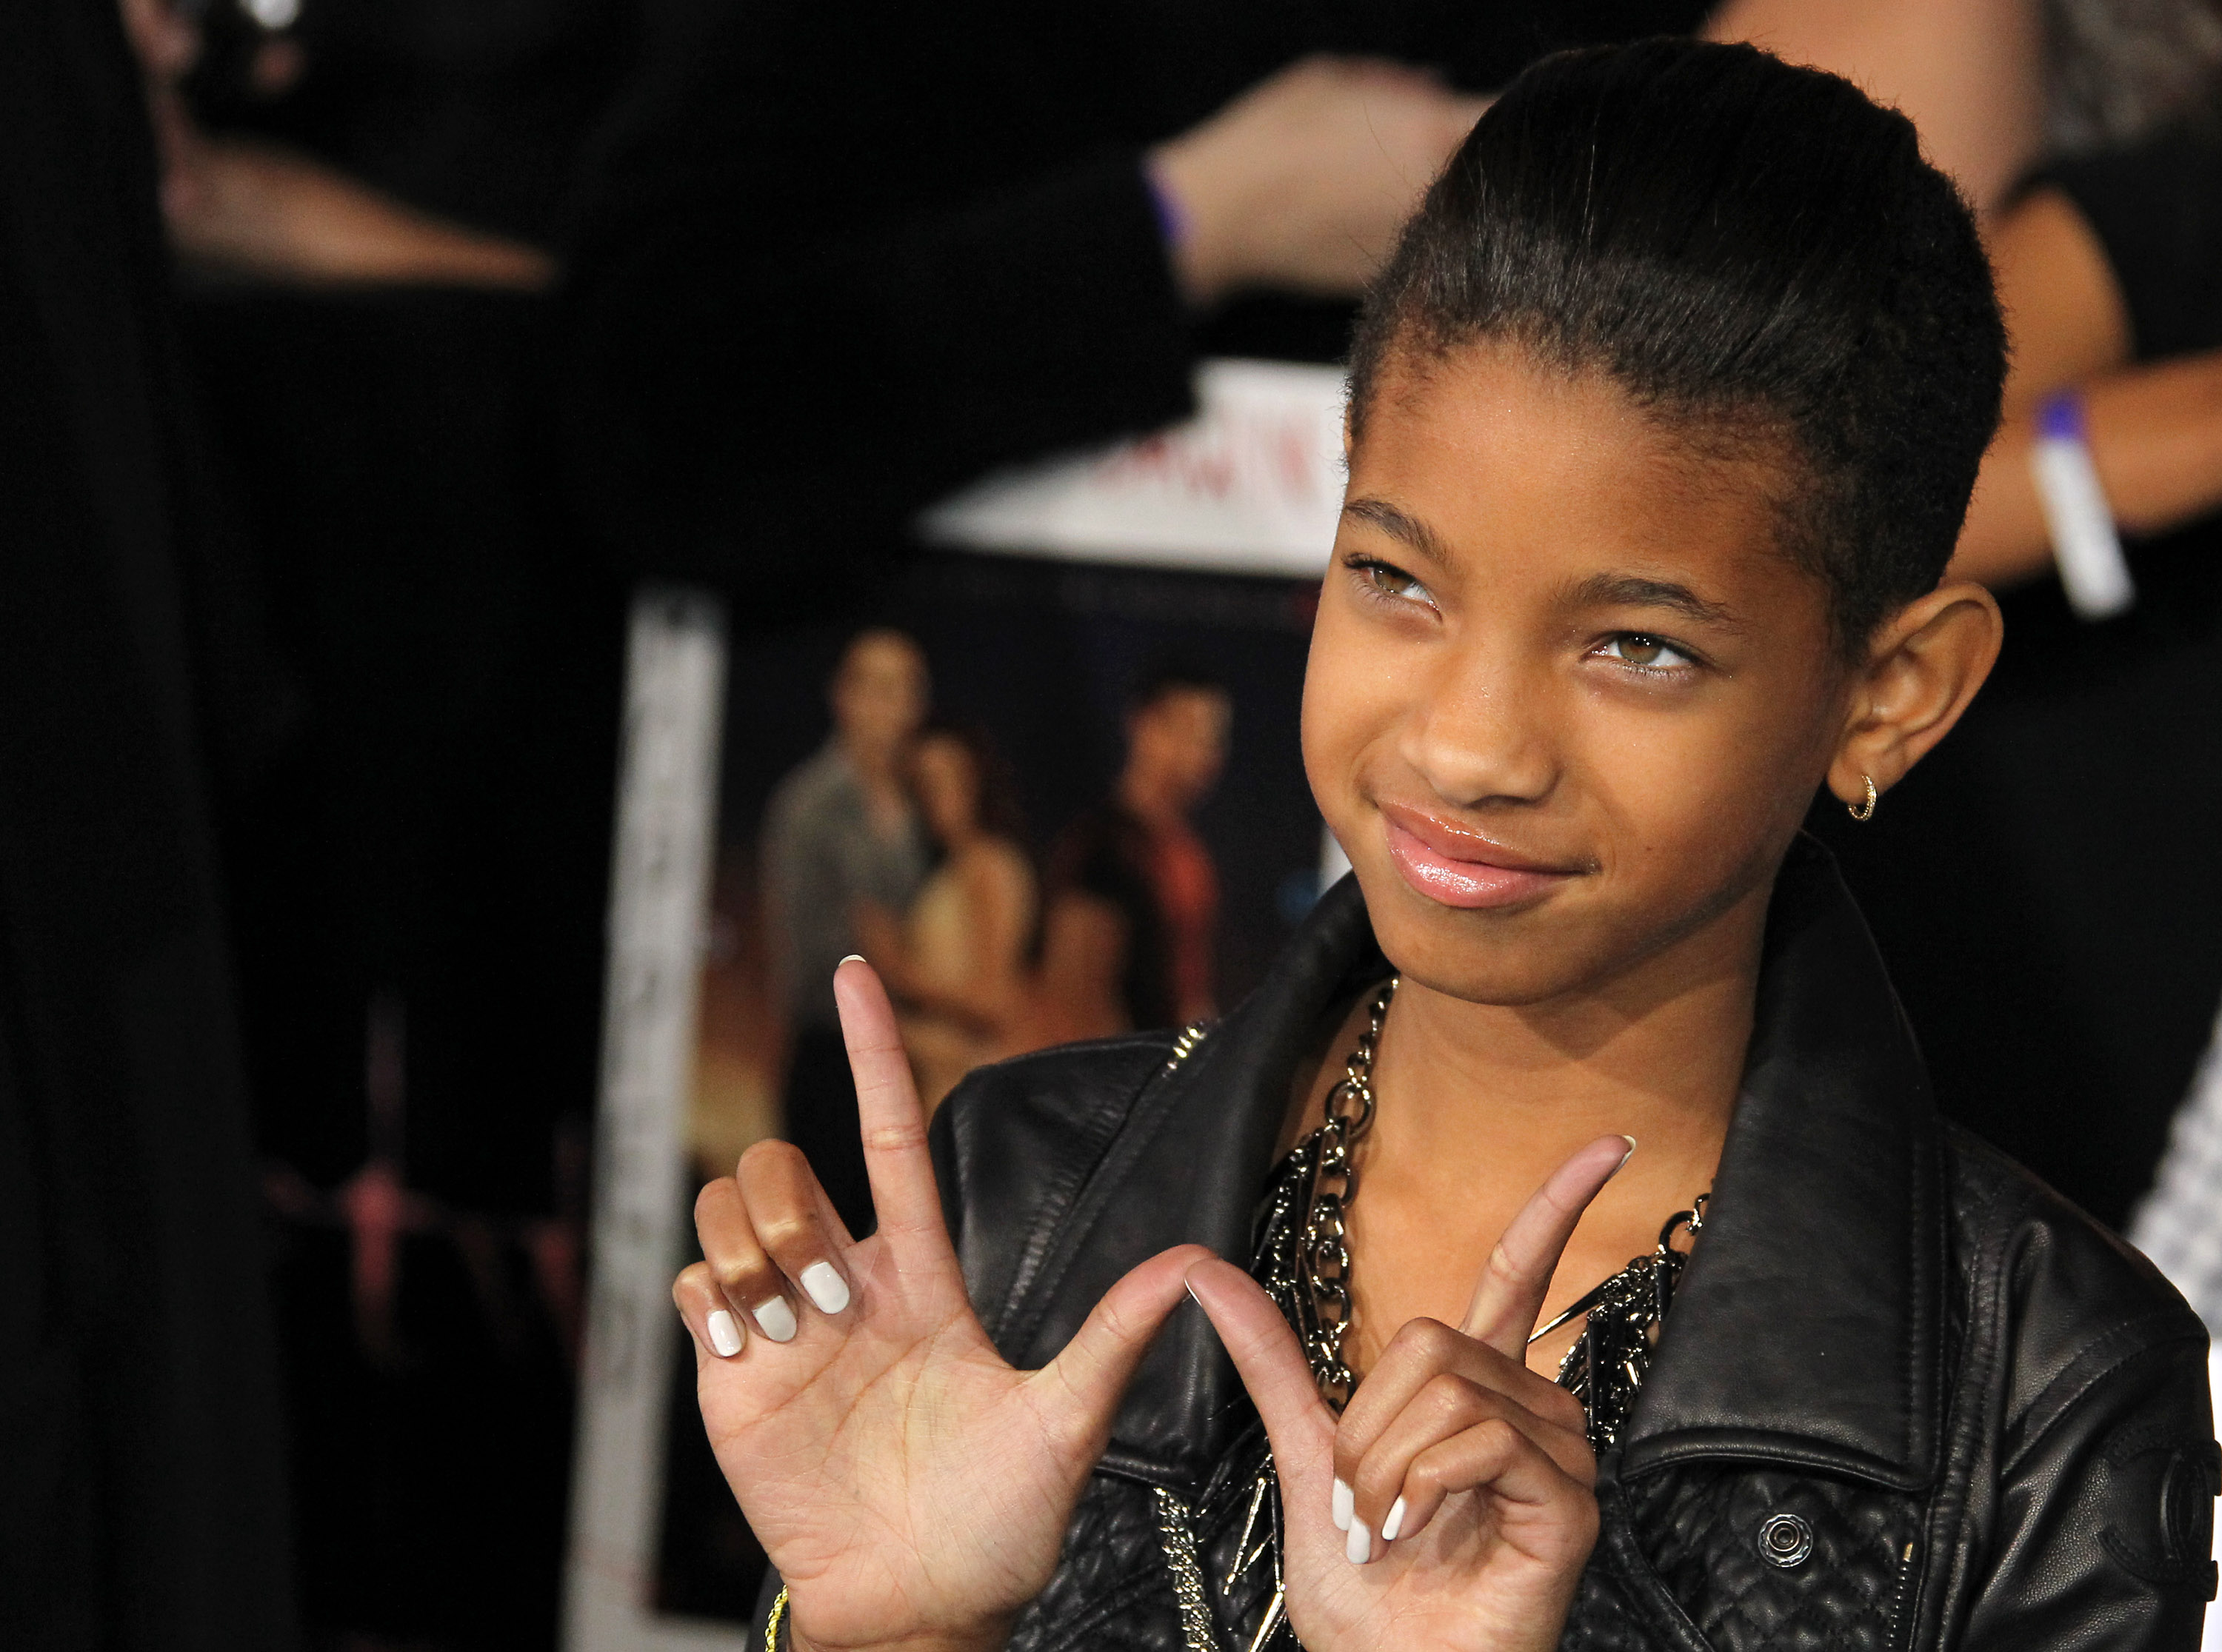 Willow Smith raising her fingers